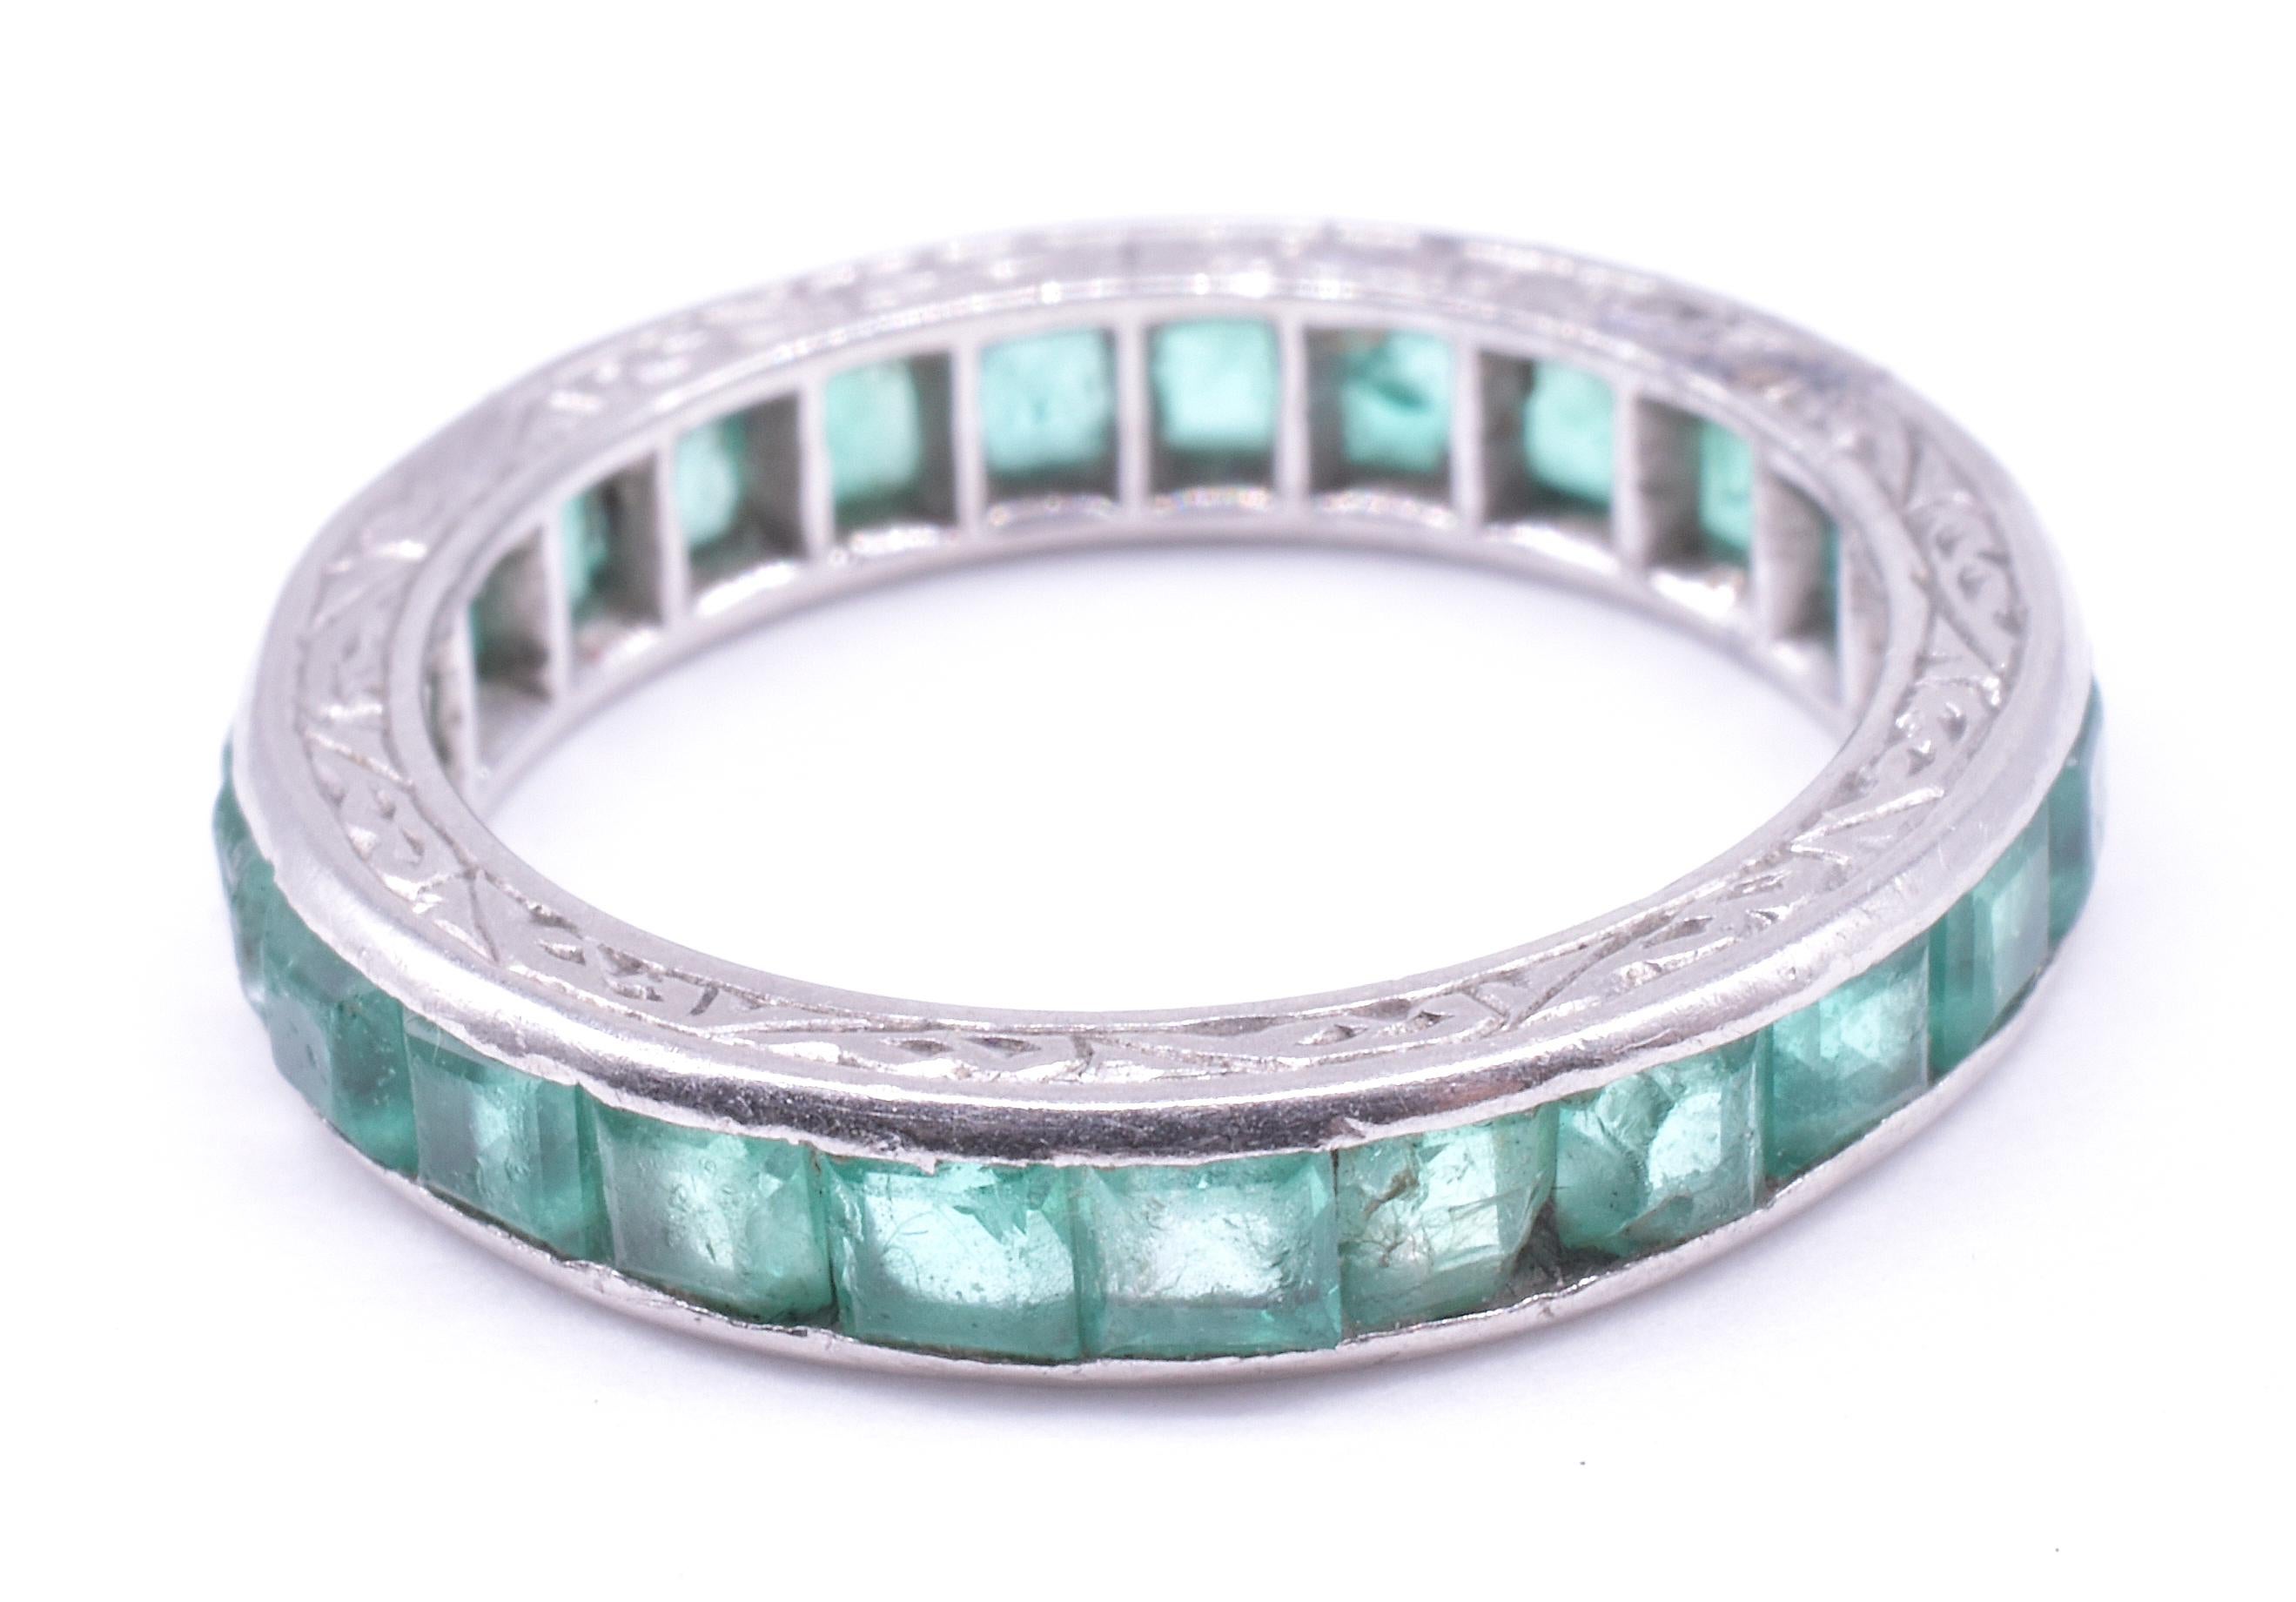 Our Deco emerald eternity band is crafted with an engraved 15K white gold band which with decorative flourishes and lines all along the rim and features 24 clear green emeralds with a total carat weight of 1.15 carats. The inside of the band has